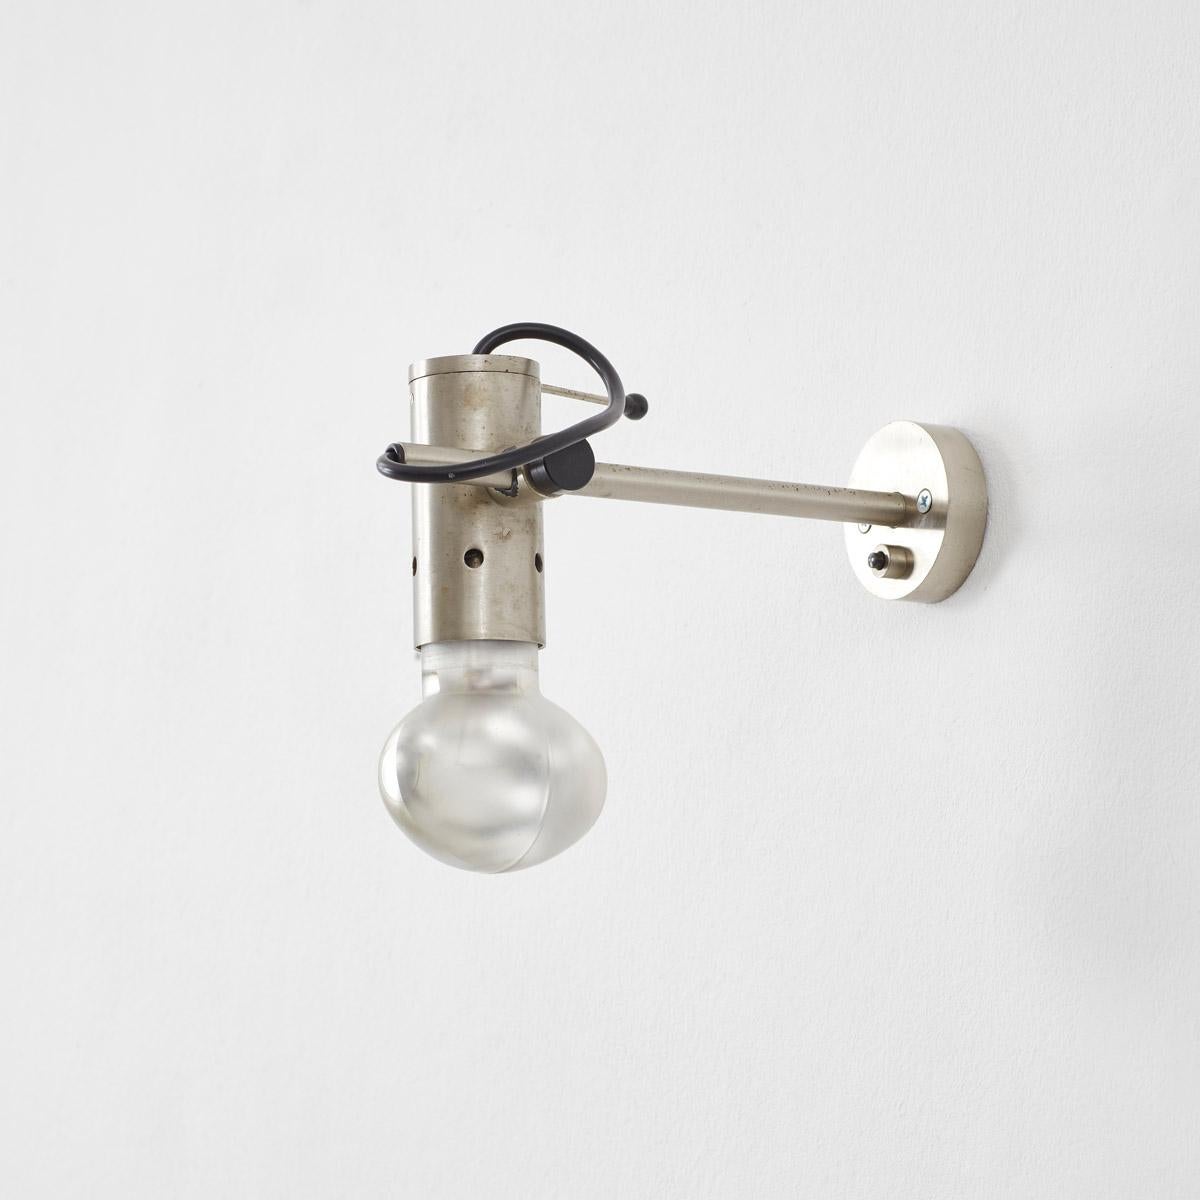 The Model 186 wall lamp is a rare piece by Tito Agnoli for O-Luce. This is an early edition, featuring nickel-plated steel arms and hardware, fitted with a ‘hammerhead’ light bulb. This design is distinctive for its versatility thanks to the